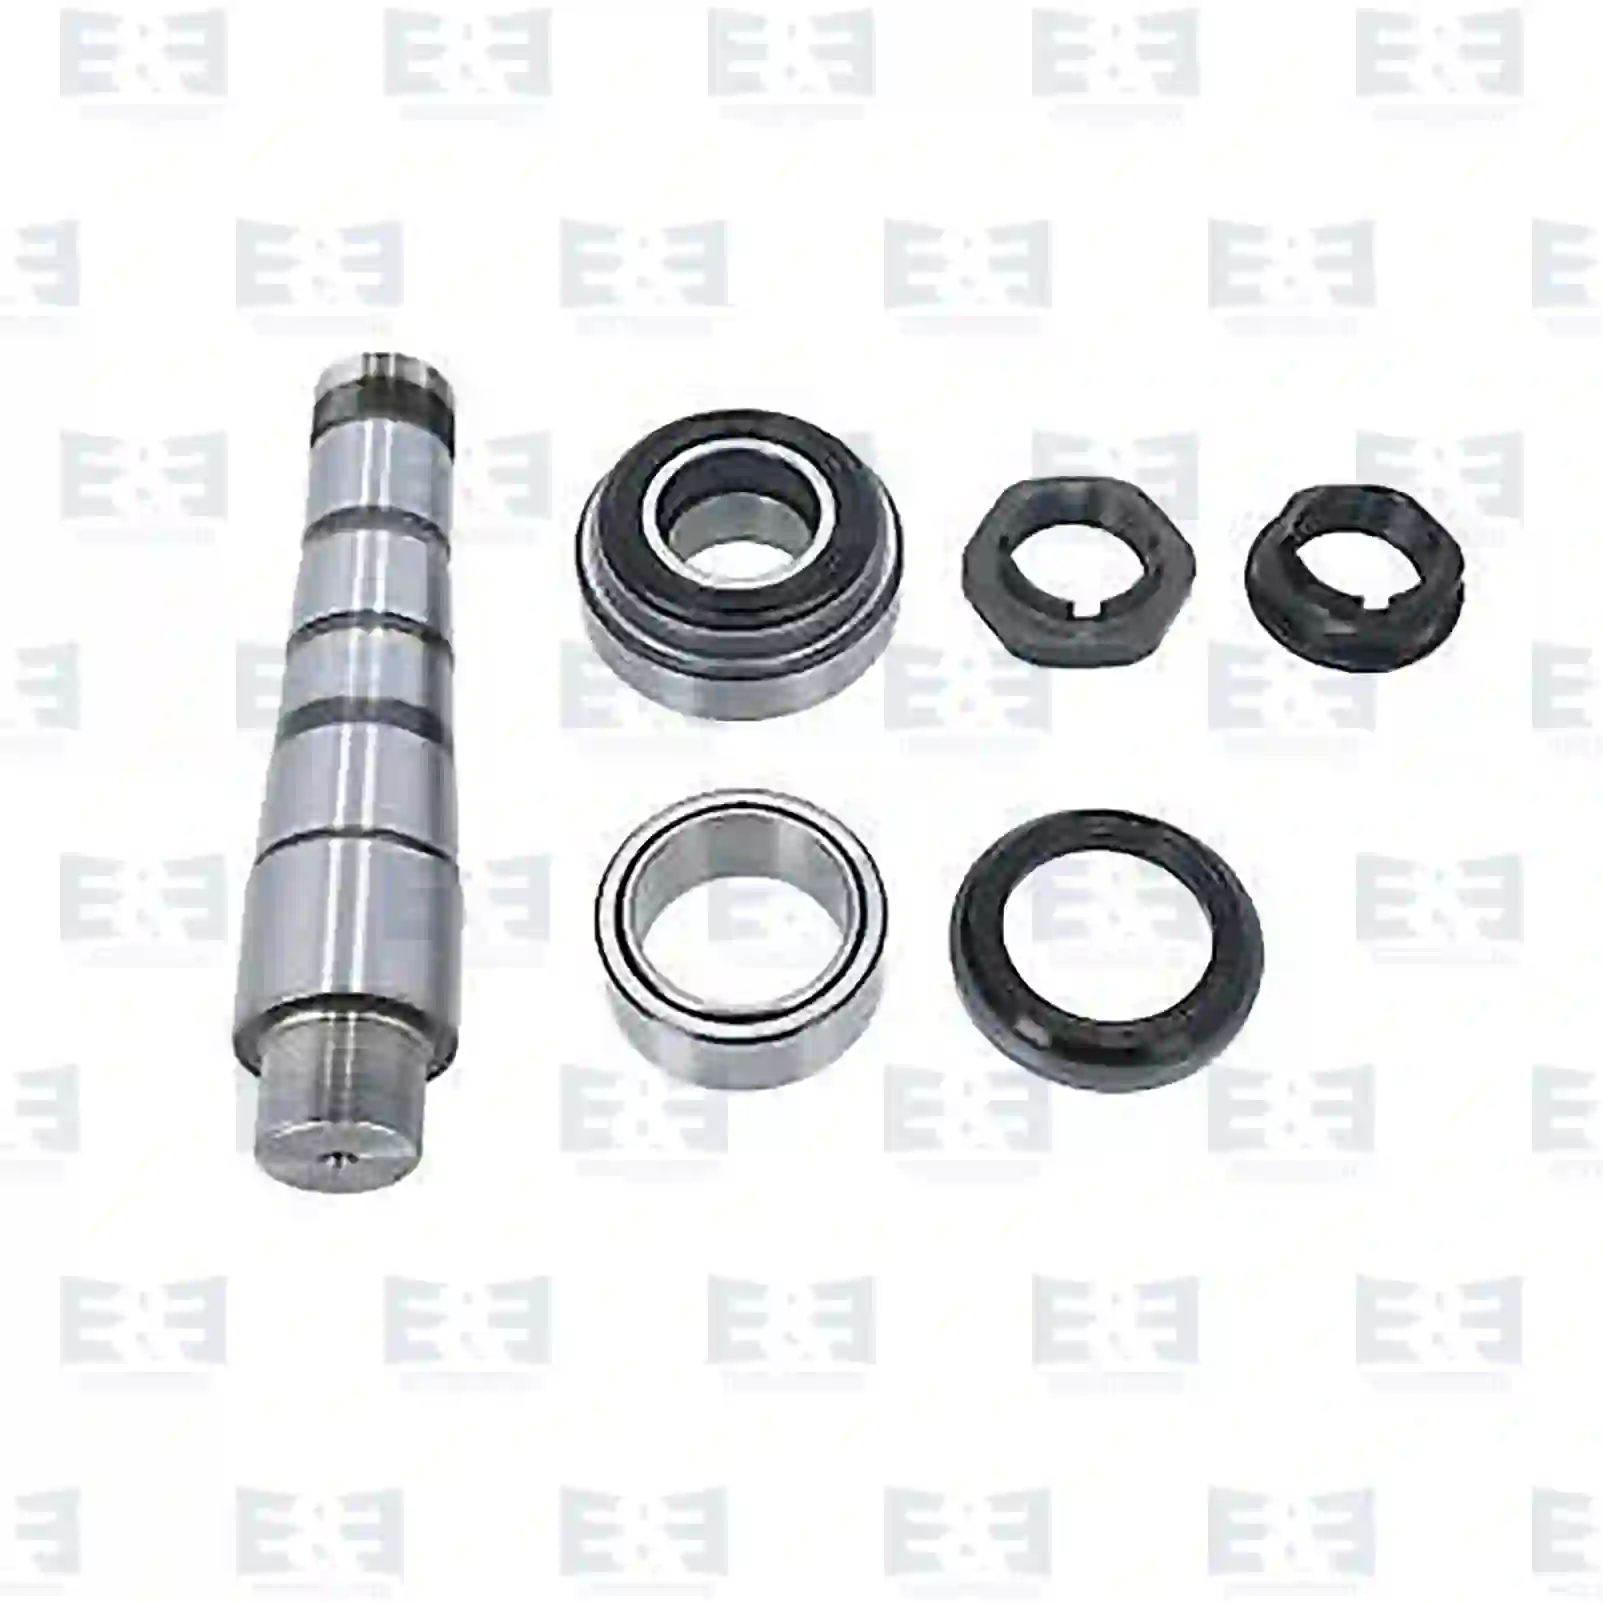 King pin kit, with bearing, 2E2270450, 7421768314, 20523015S1, 20751021, ZG41298-0008, , ||  2E2270450 E&E Truck Spare Parts | Truck Spare Parts, Auotomotive Spare Parts King pin kit, with bearing, 2E2270450, 7421768314, 20523015S1, 20751021, ZG41298-0008, , ||  2E2270450 E&E Truck Spare Parts | Truck Spare Parts, Auotomotive Spare Parts